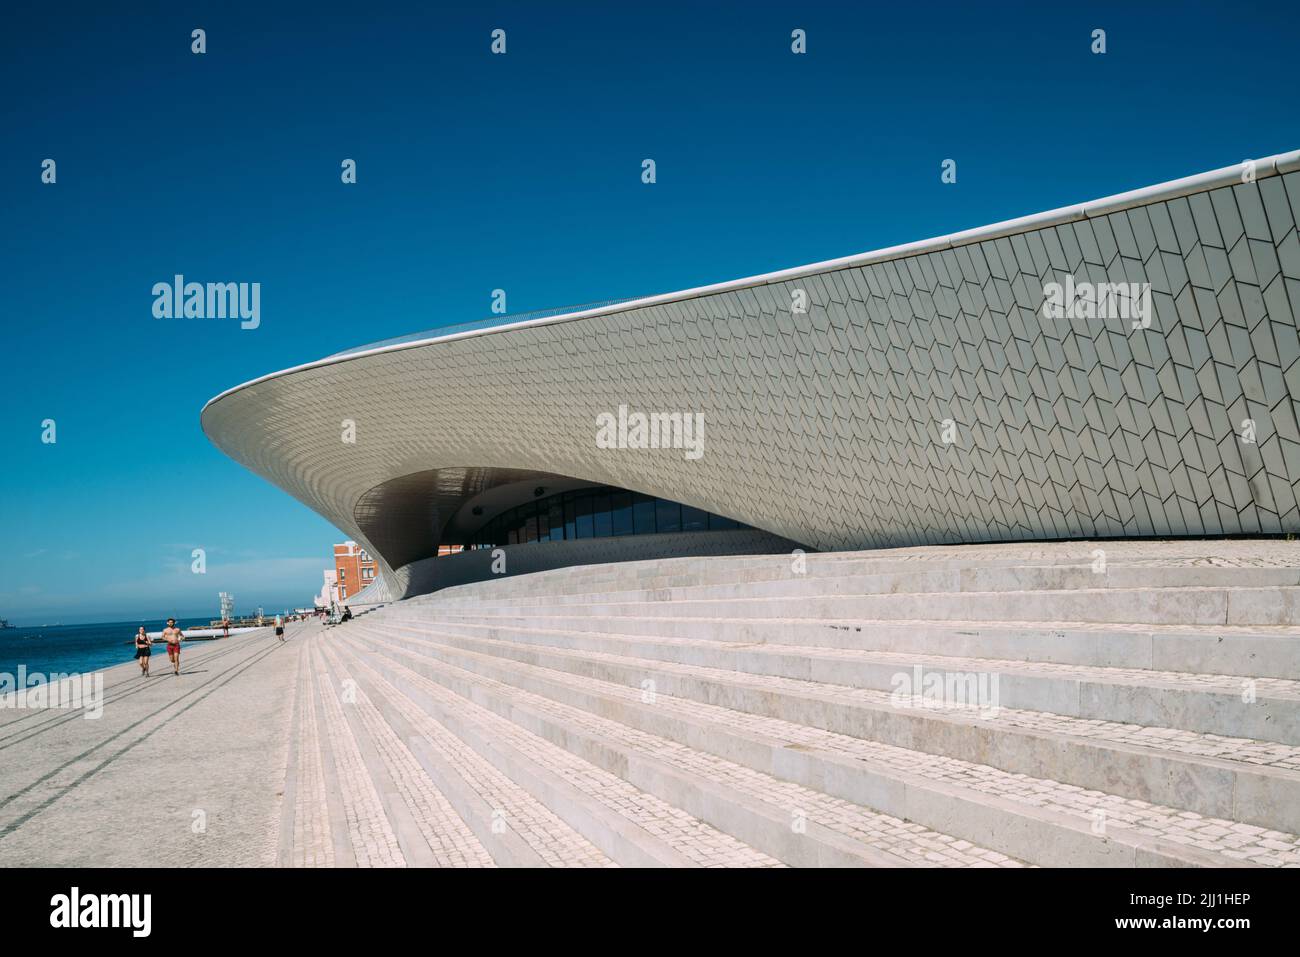 Lisbon, Portugal - July 21, 2022: Facade of MAAT - Museum of Art, Architecture and Technology in Lisbon, Portugal Stock Photo